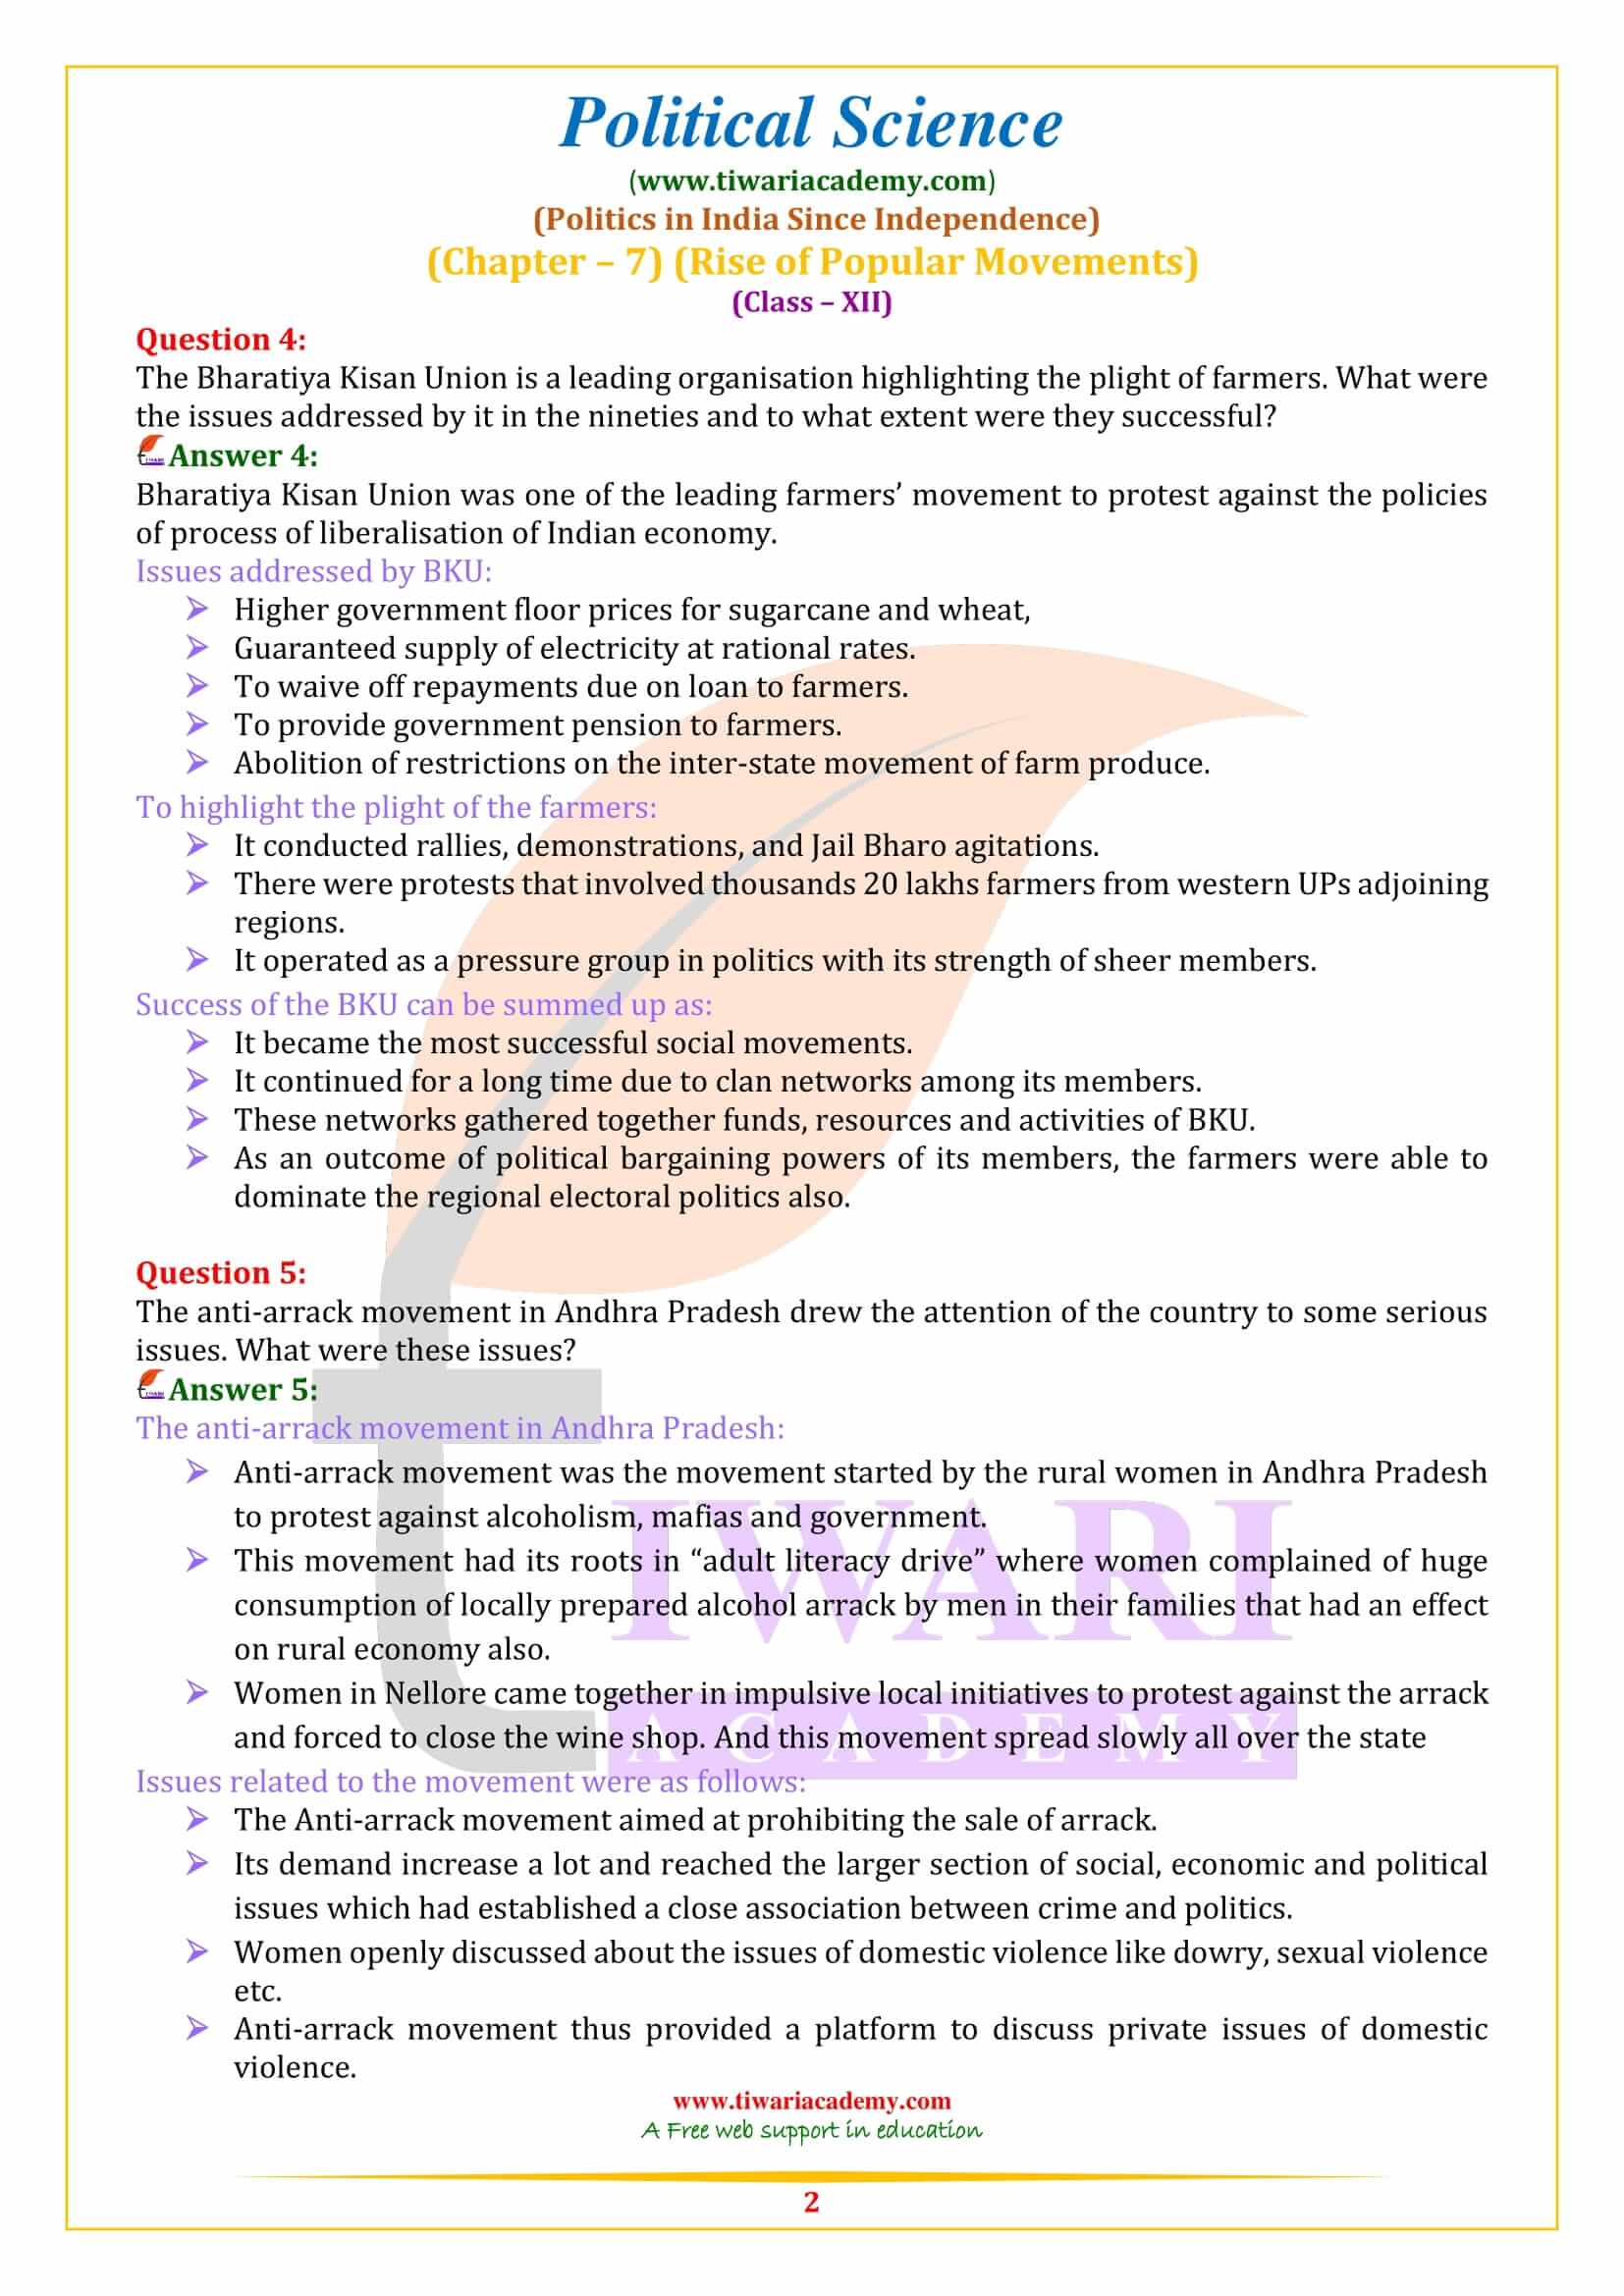 NCERT Solutions for Class 12 Political Science Part 2 Chapter 7